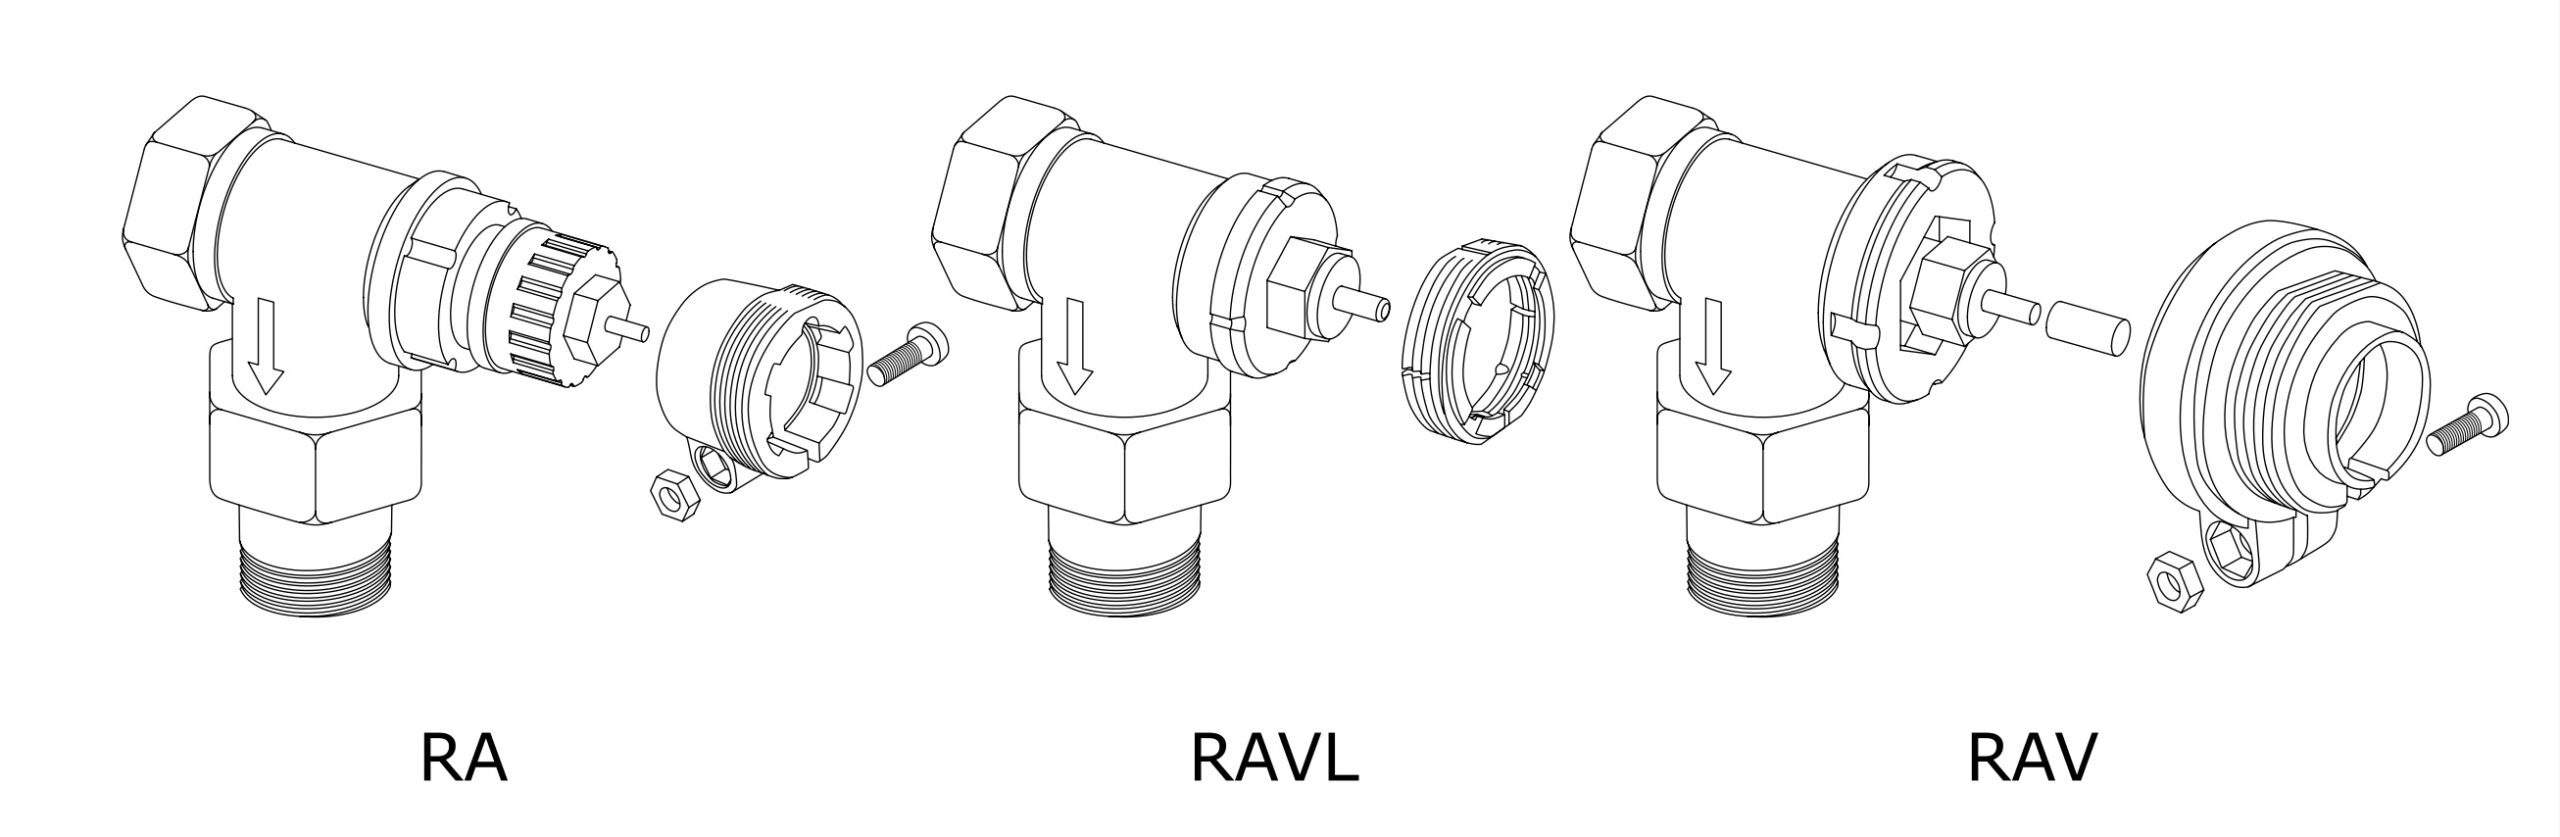 Shelly TRV comes with these adapters that will help you installing it in a matter of seconds